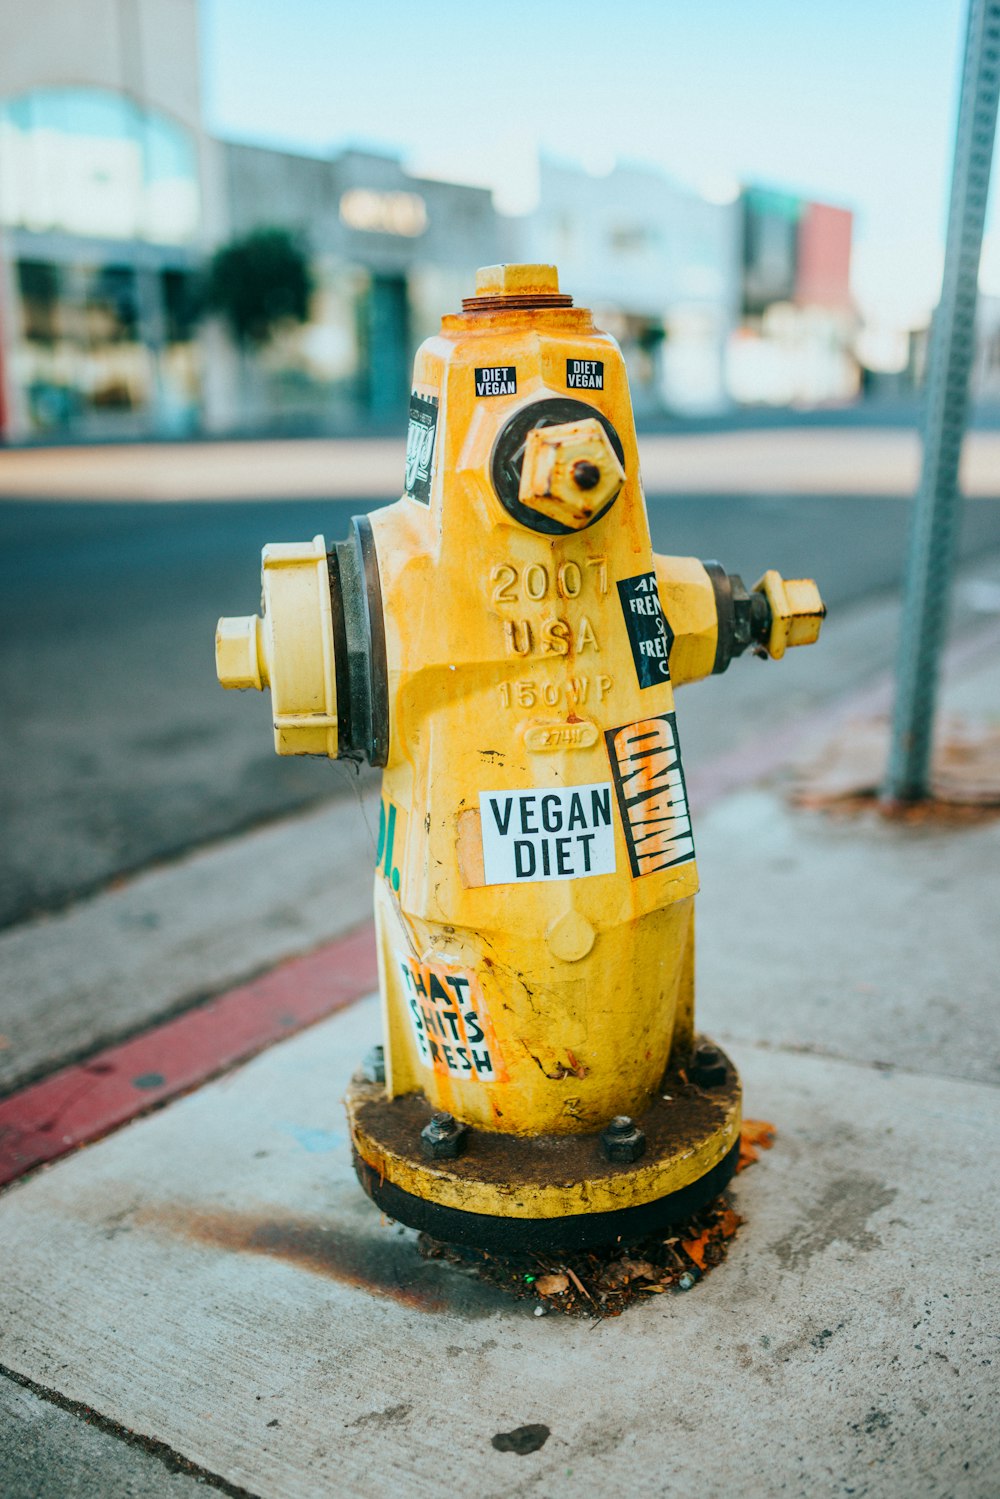 yellow fire hydrant on gray concrete road during daytime